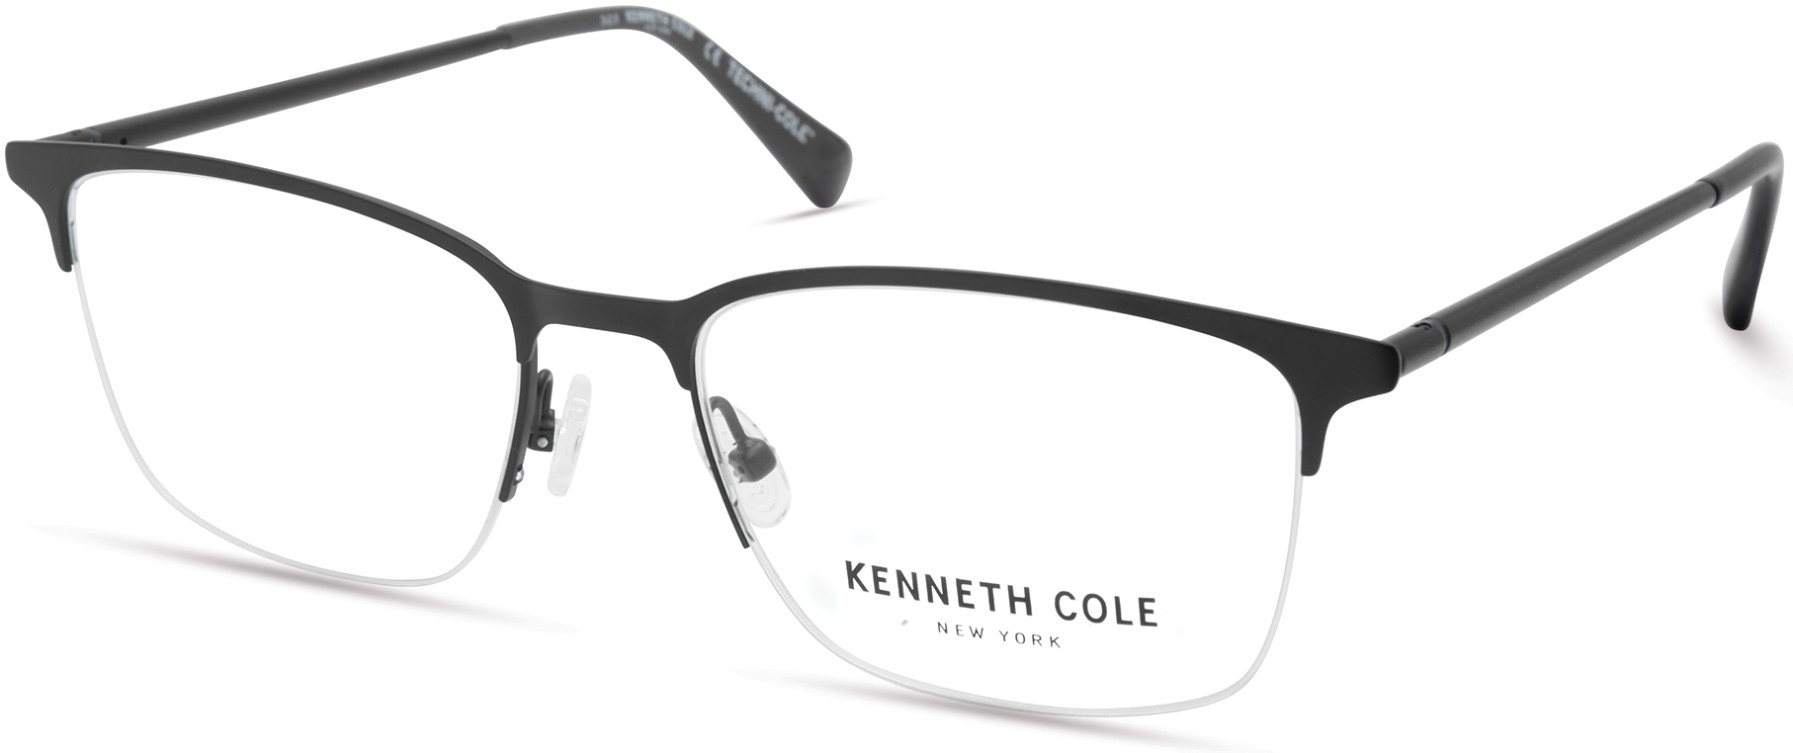 KENNETH COLE NY 0322